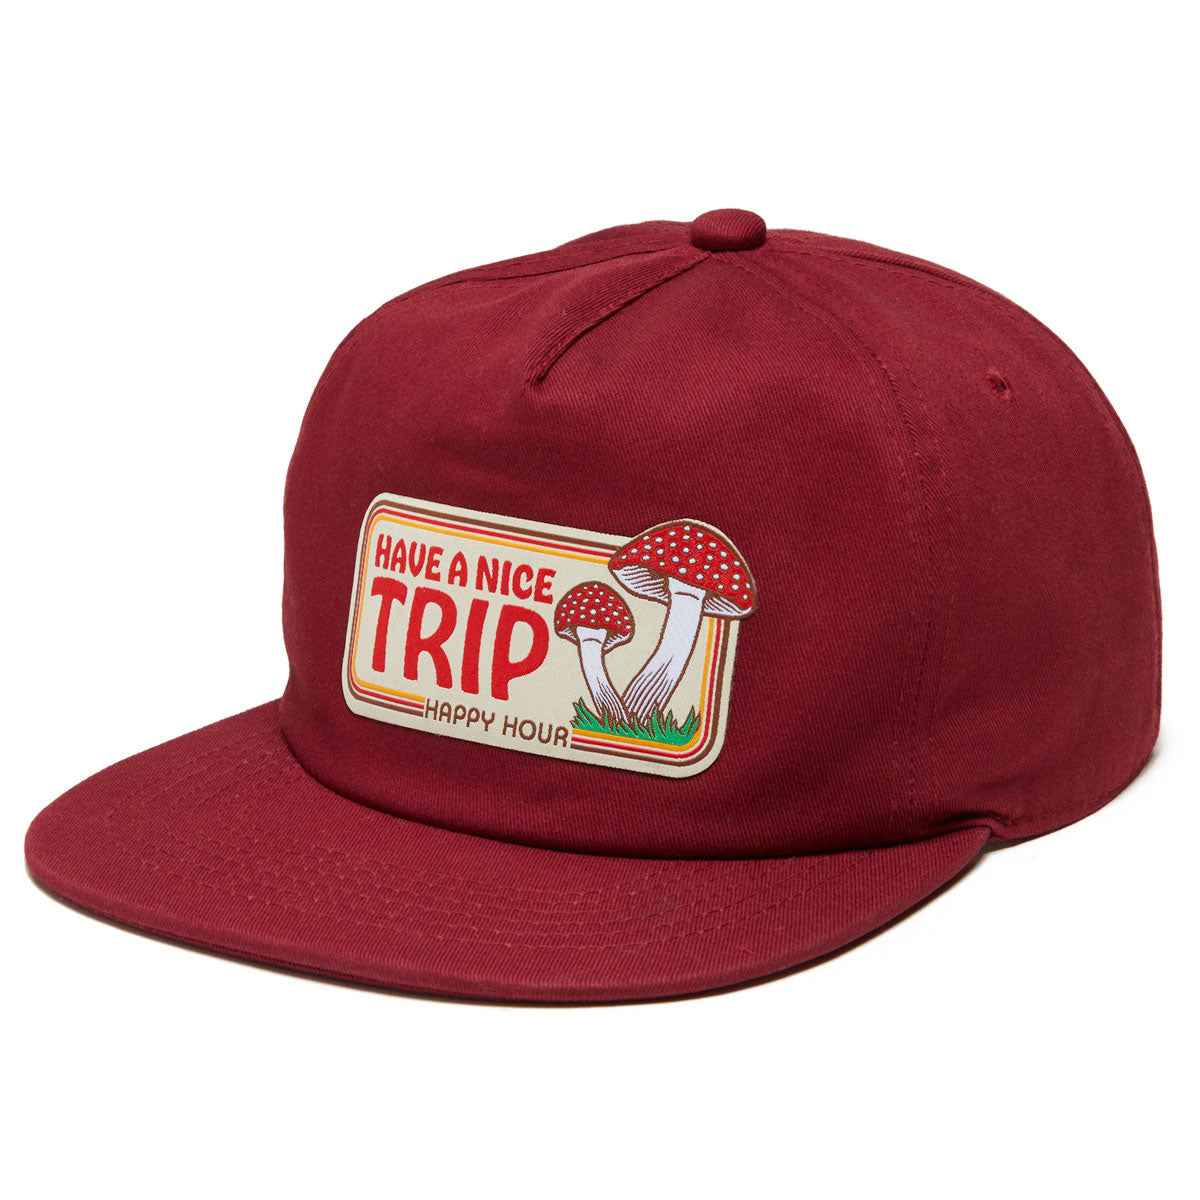 Happy Hour Have A Nice Trip Hat - Burgundy image 1